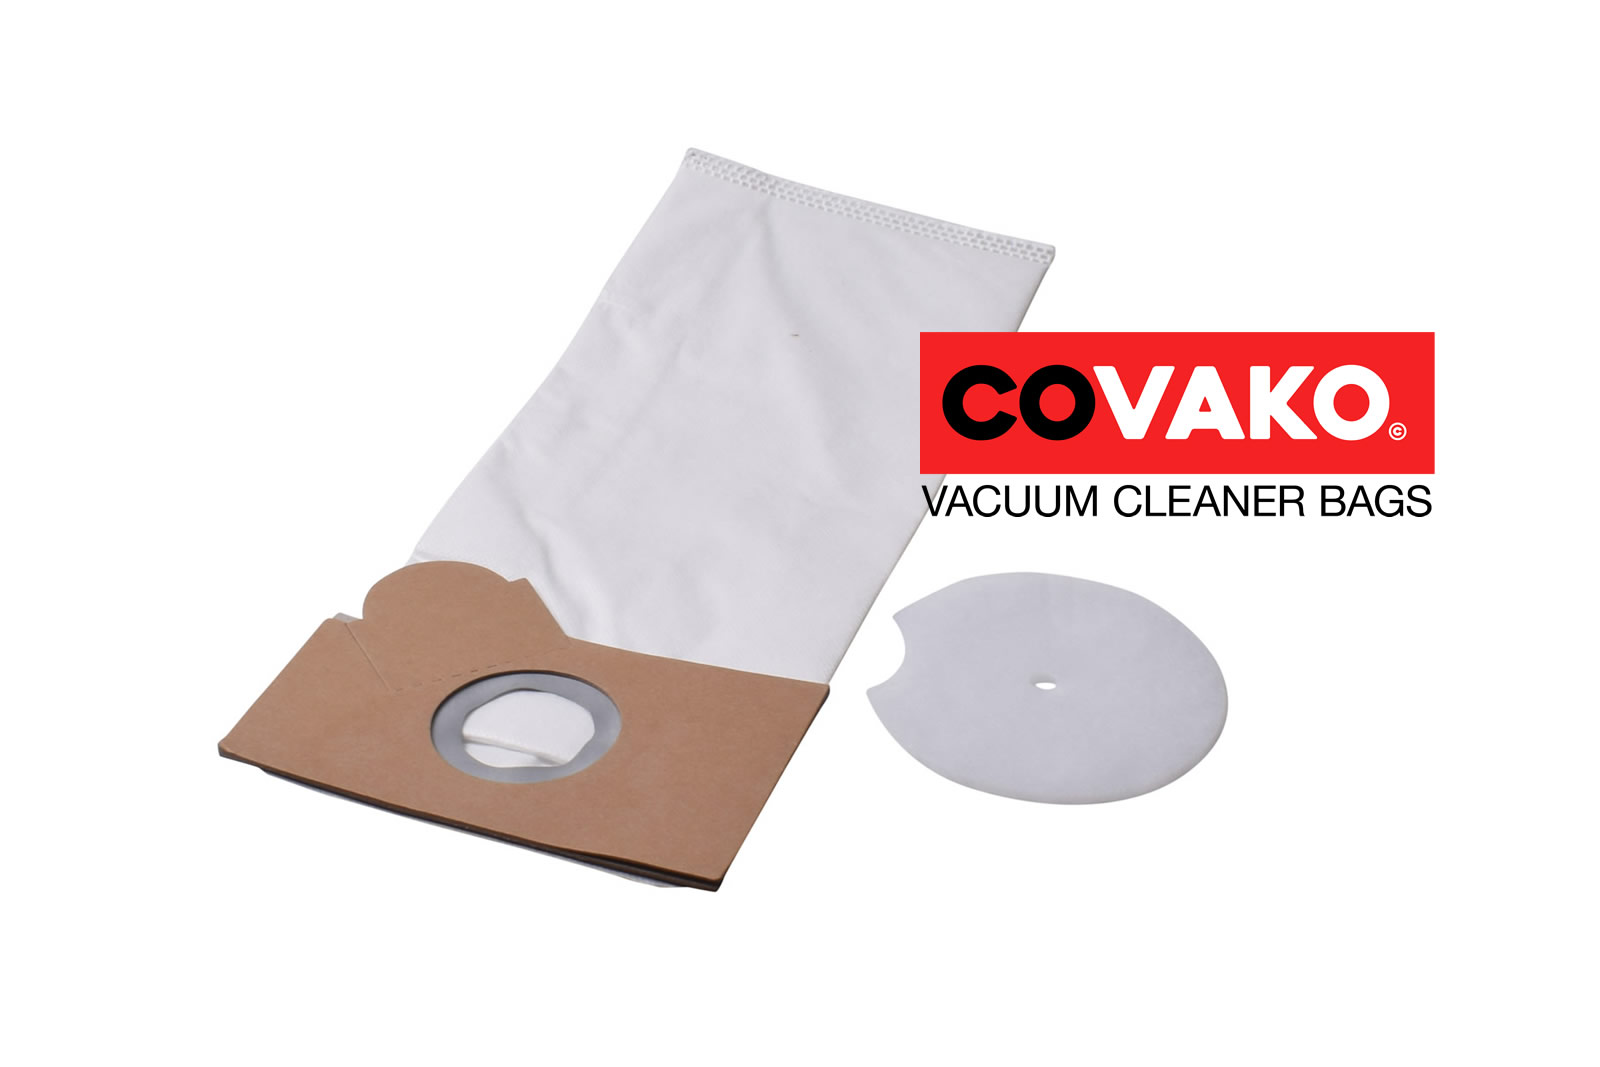 Nilco Combi 17-46 / Synthesis - Nilco vacuum cleaner bags